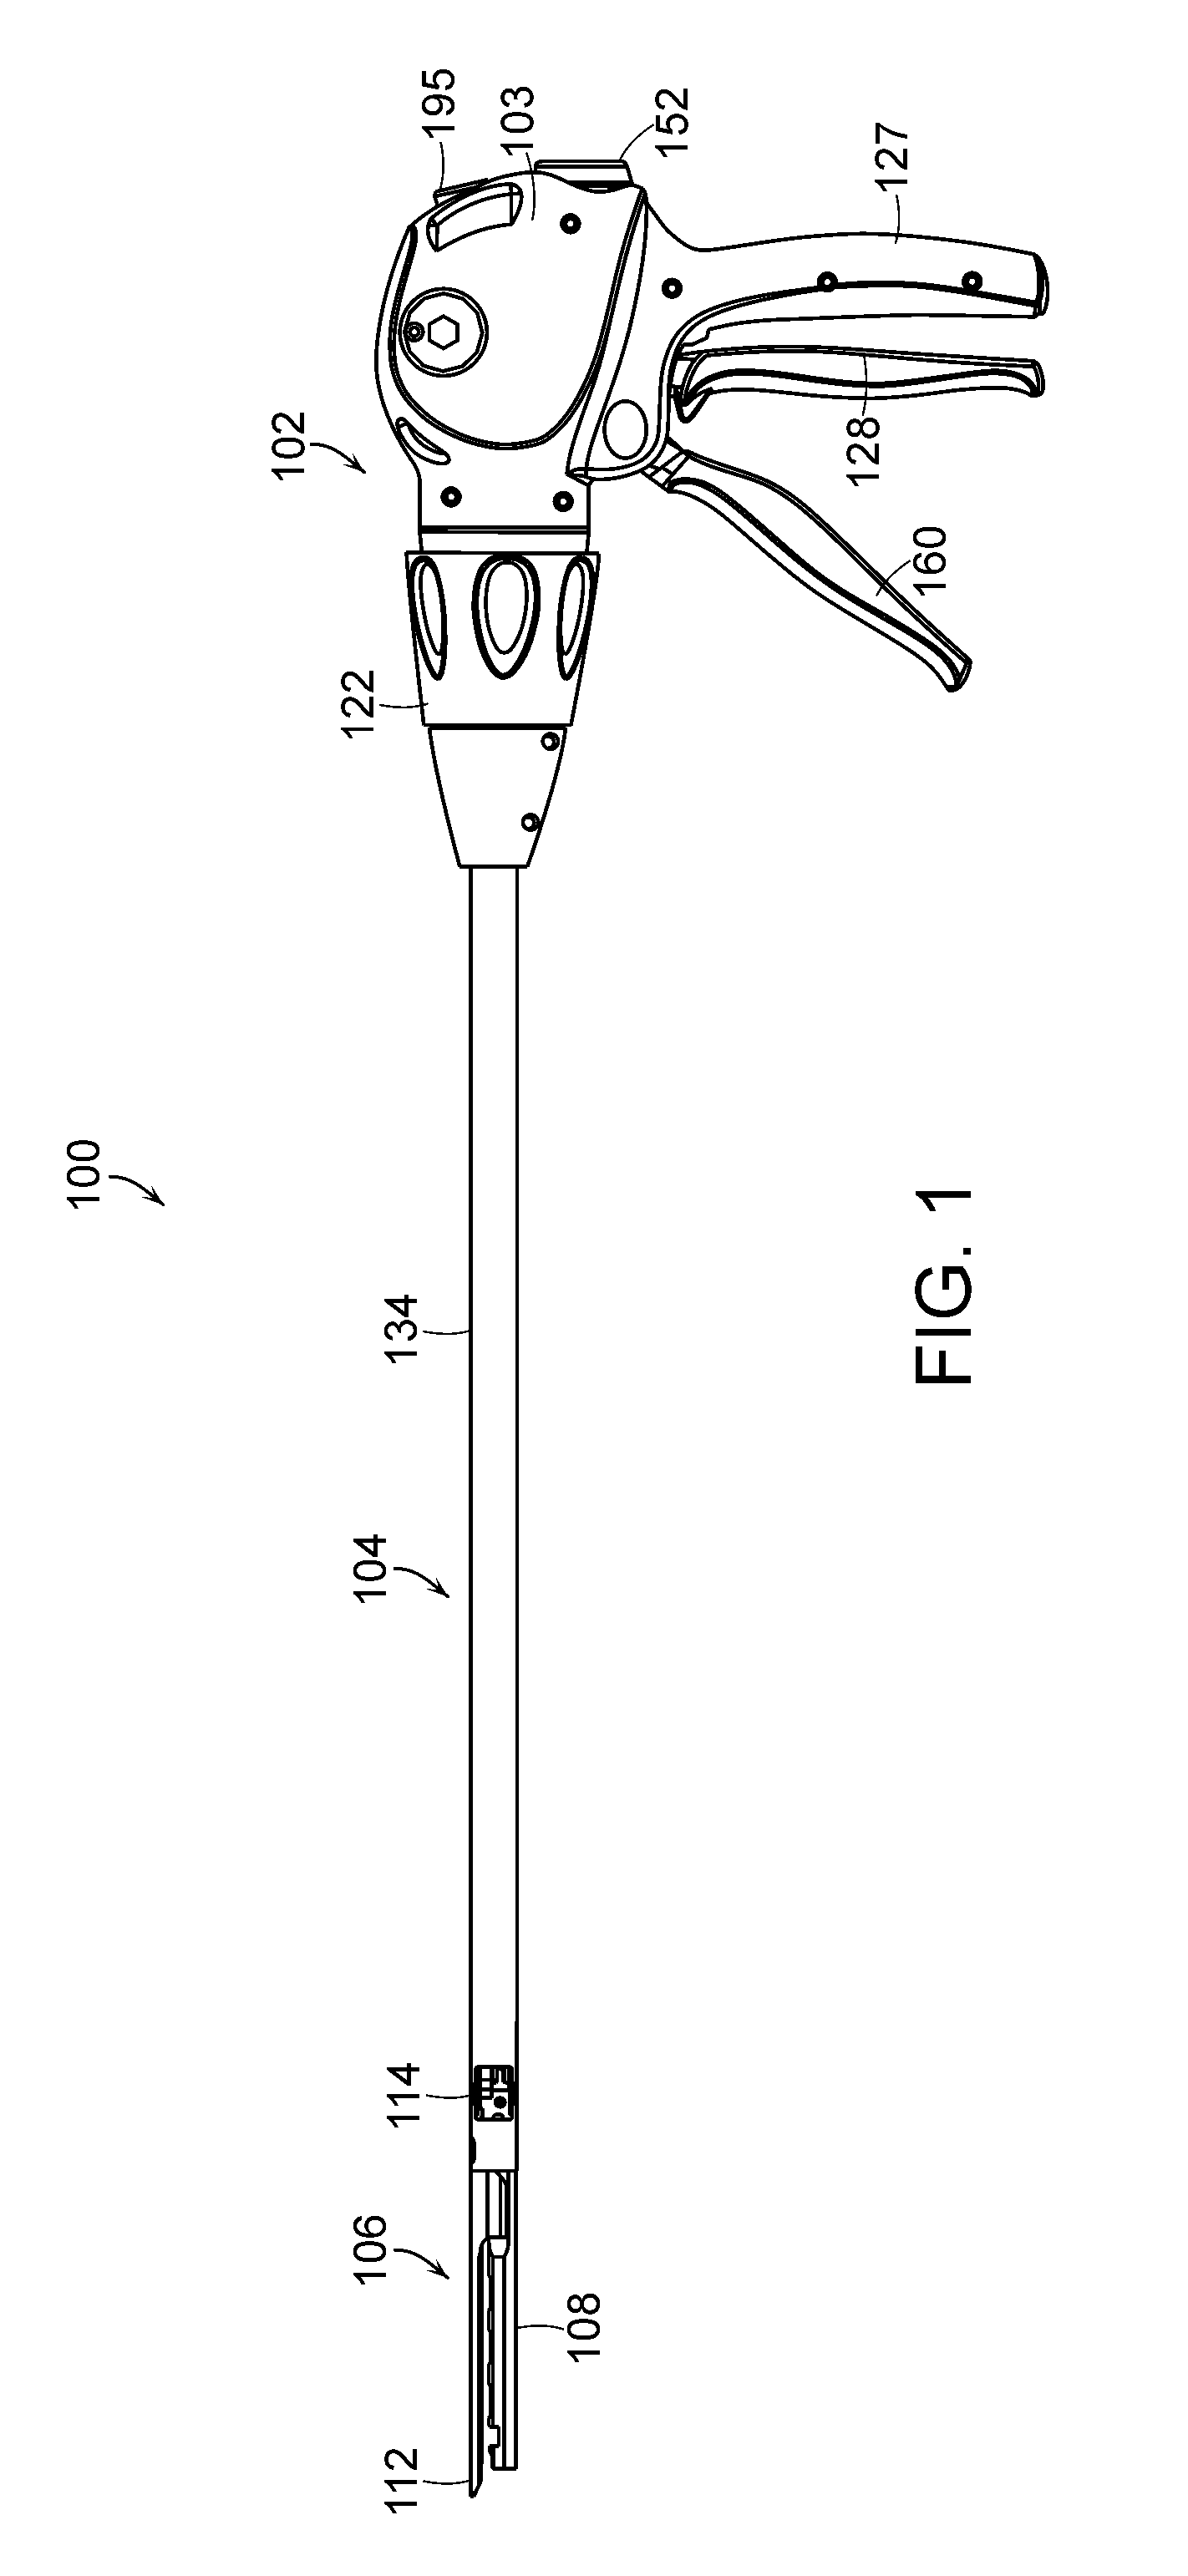 Surgical stapling instrument with an articulating end effector